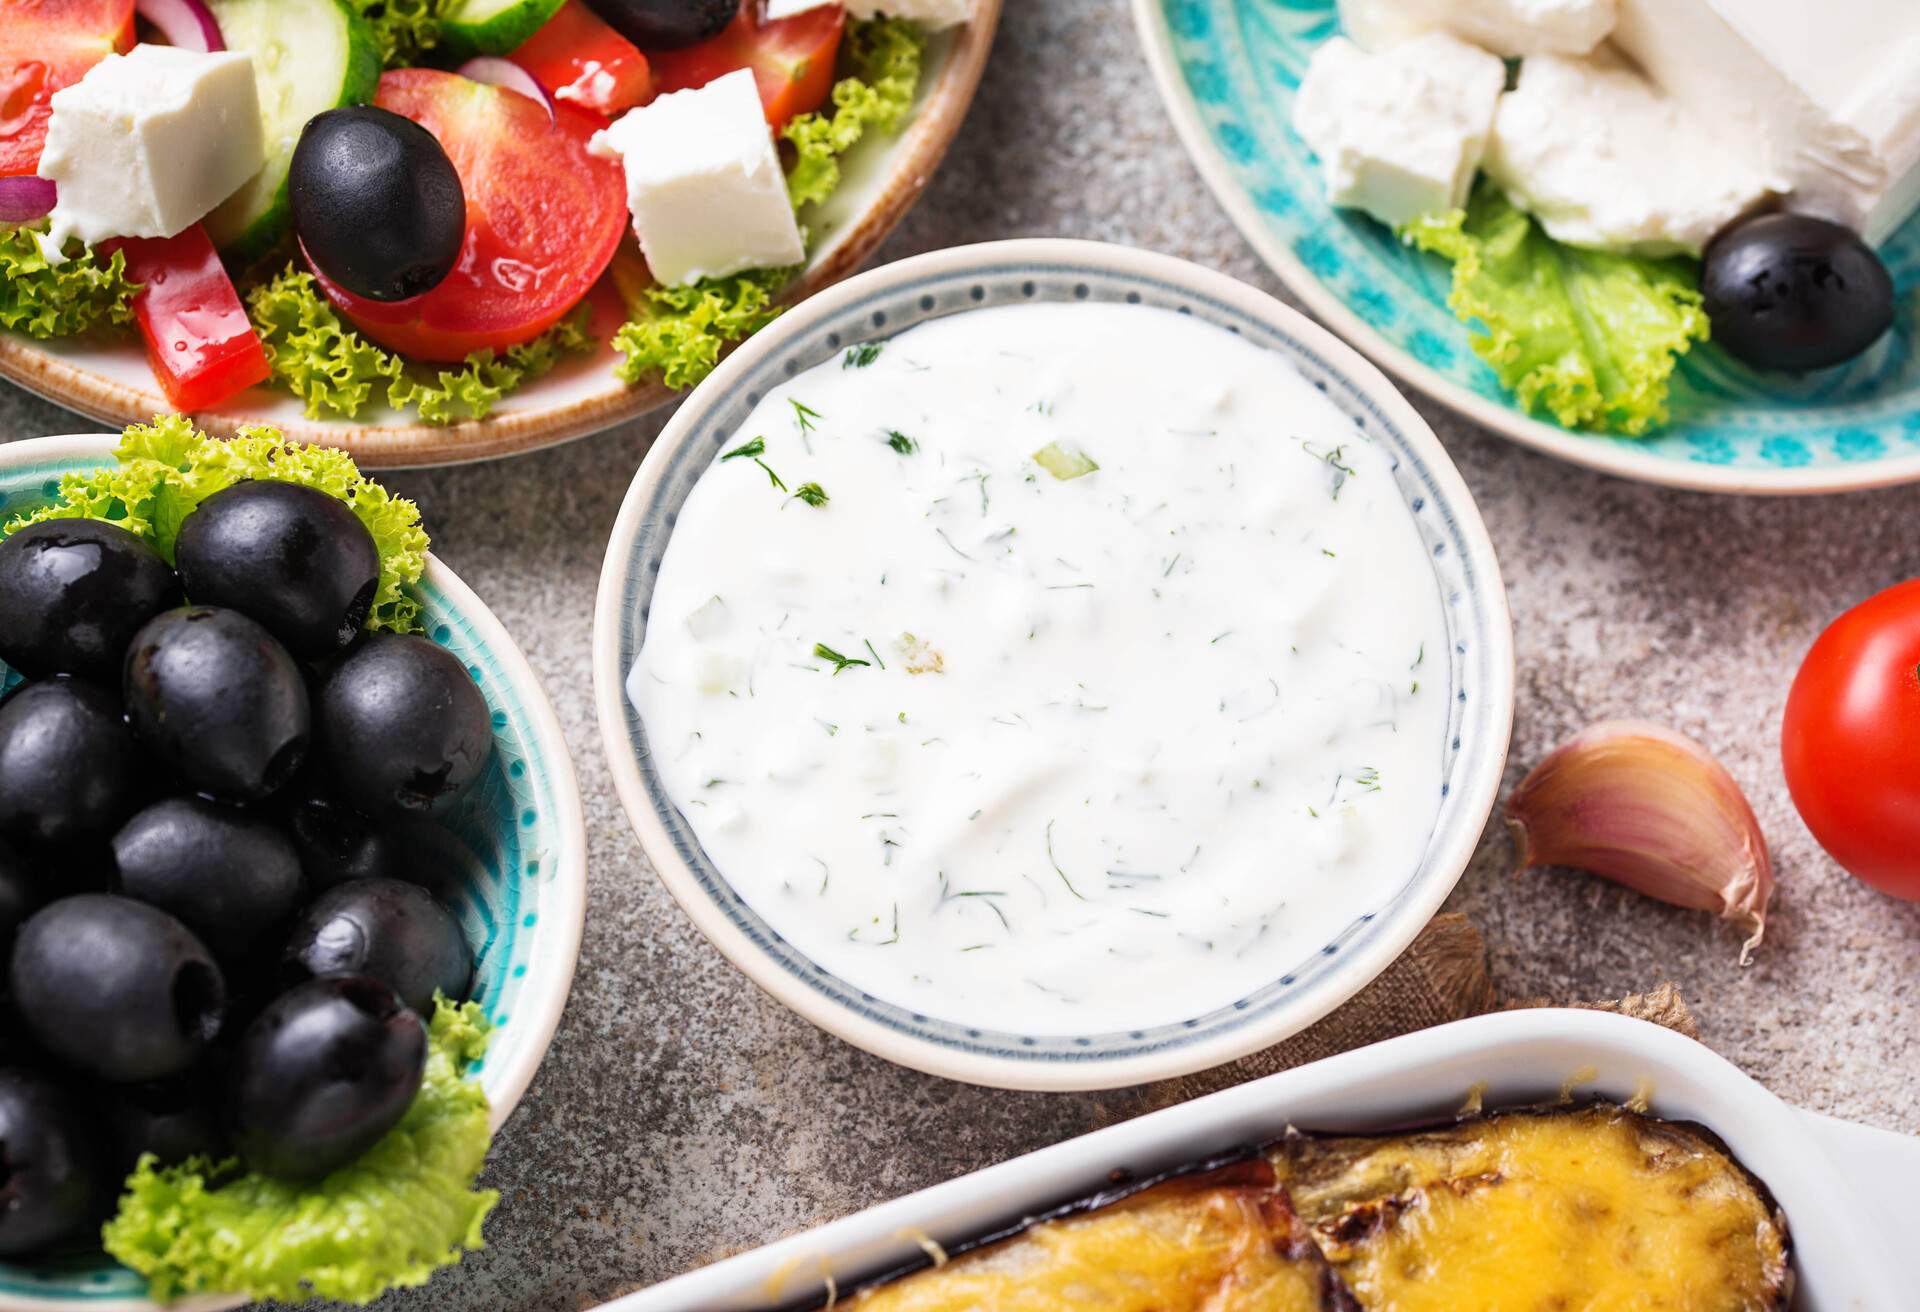 Tzatziki sauce and traditional greek dishes. Top view